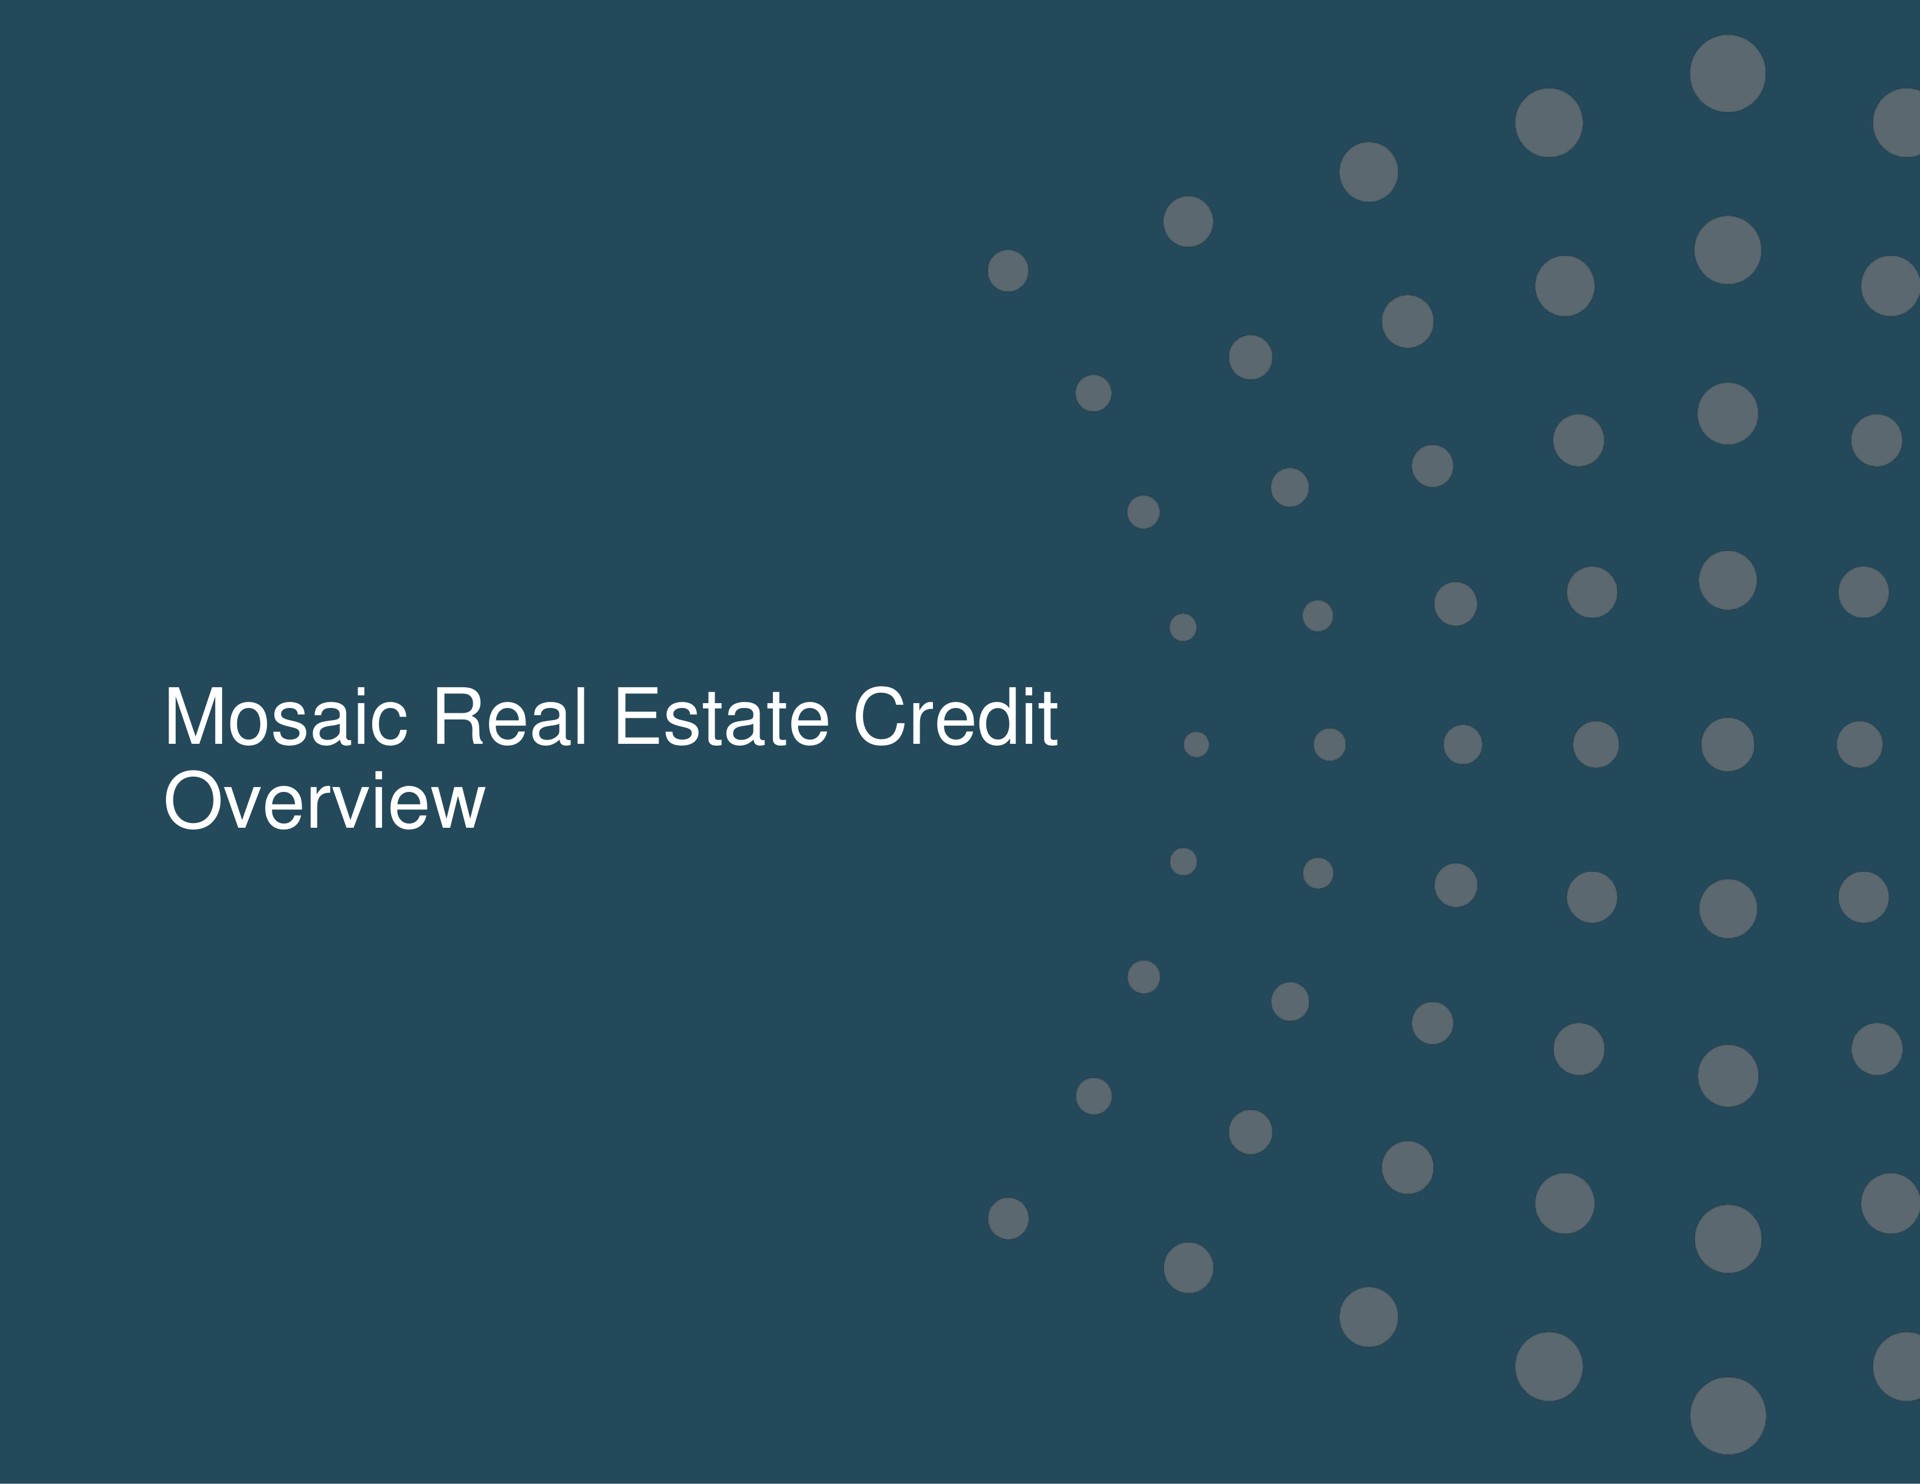 mosaic real estate credit overview | Ready Capital